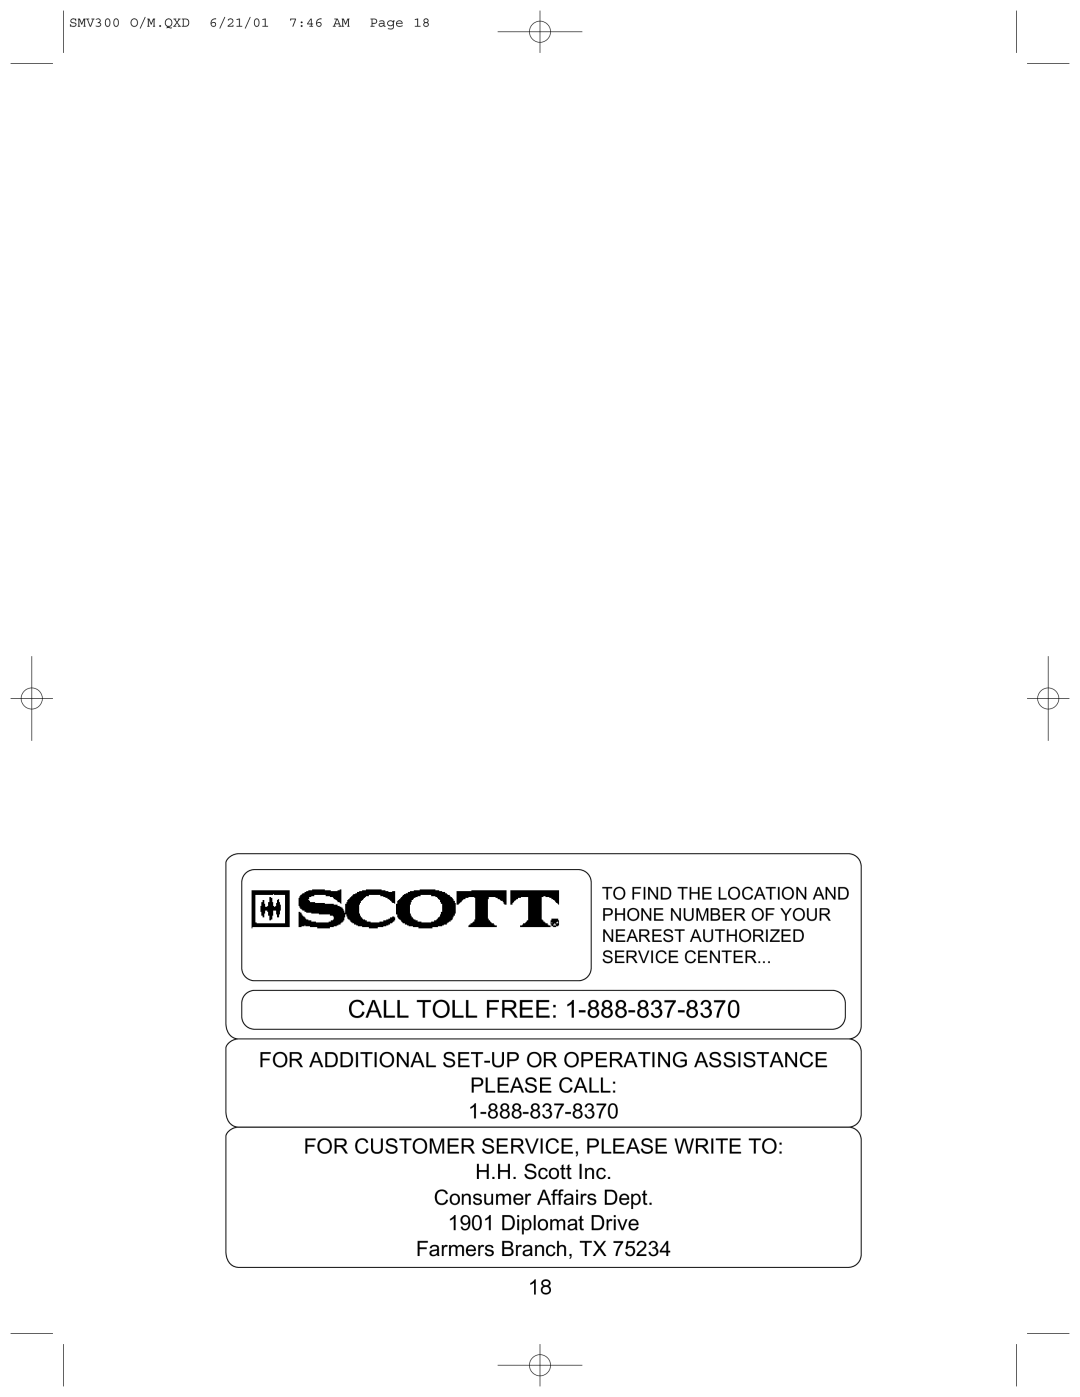 Scotts SMV300 Call Toll Free, For Additional Set-Upor Operating Assistance, Please Call, Diplomat Drive Farmers Branch, TX 